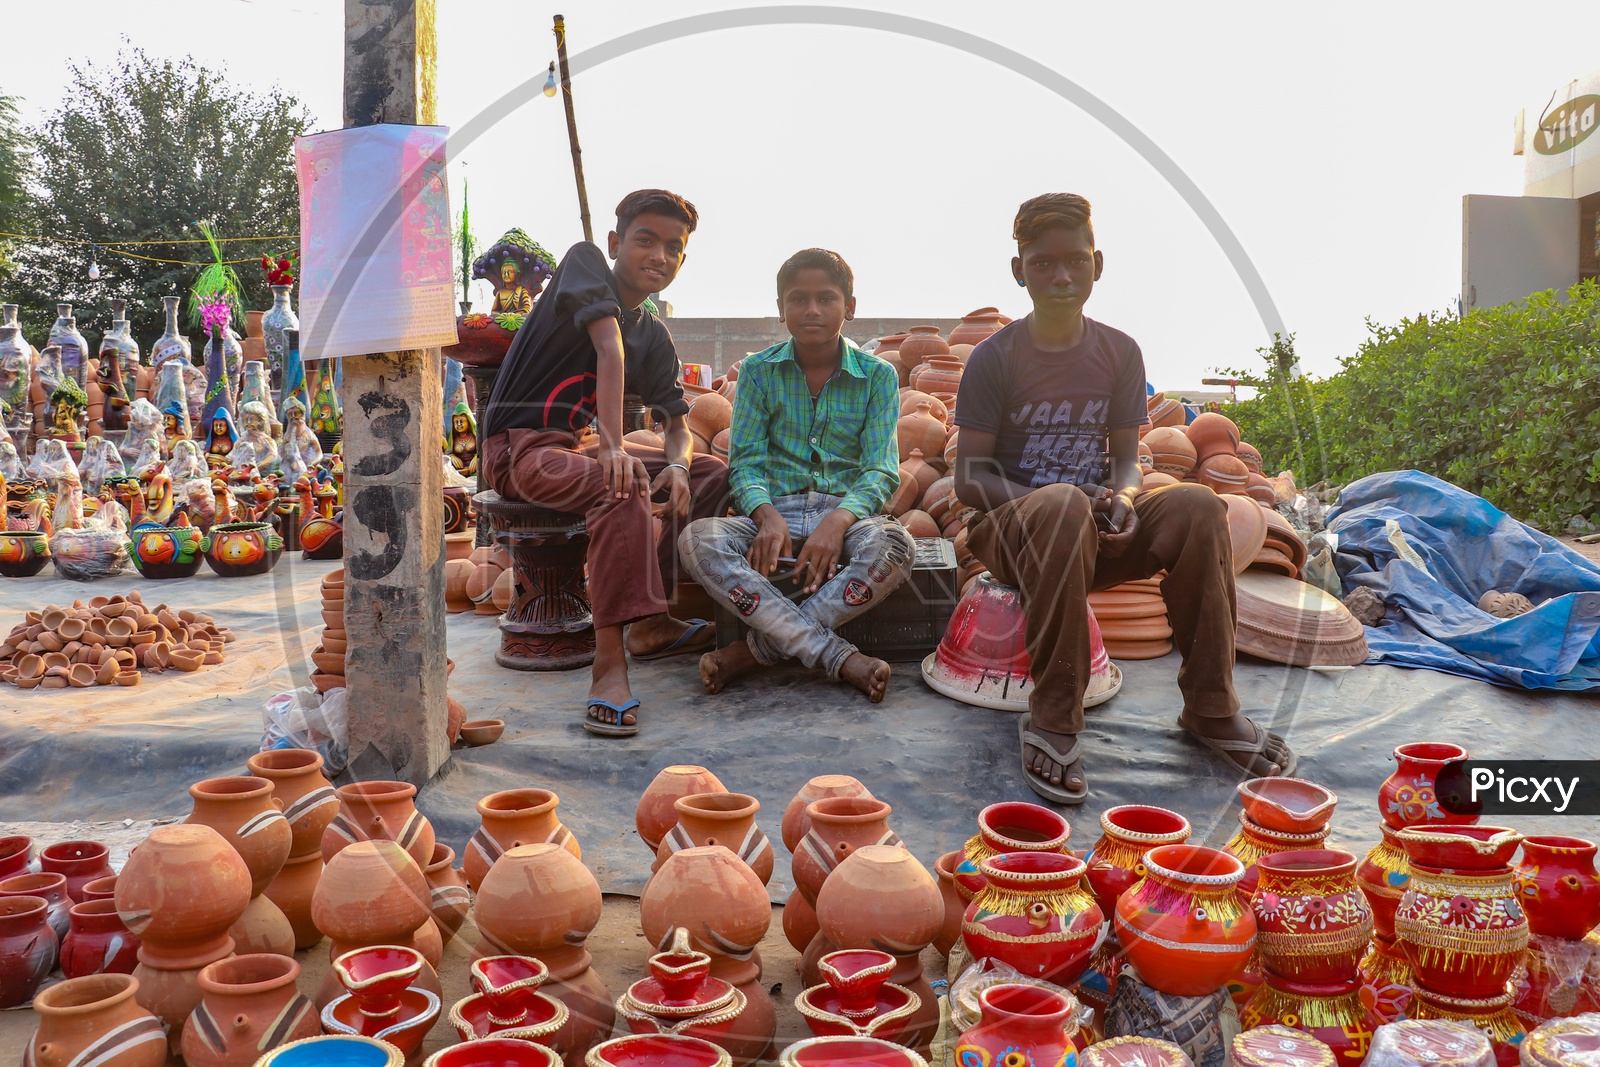 Indian Young Boys Selling Earthen Pots  At a Road Side Vendor Stall